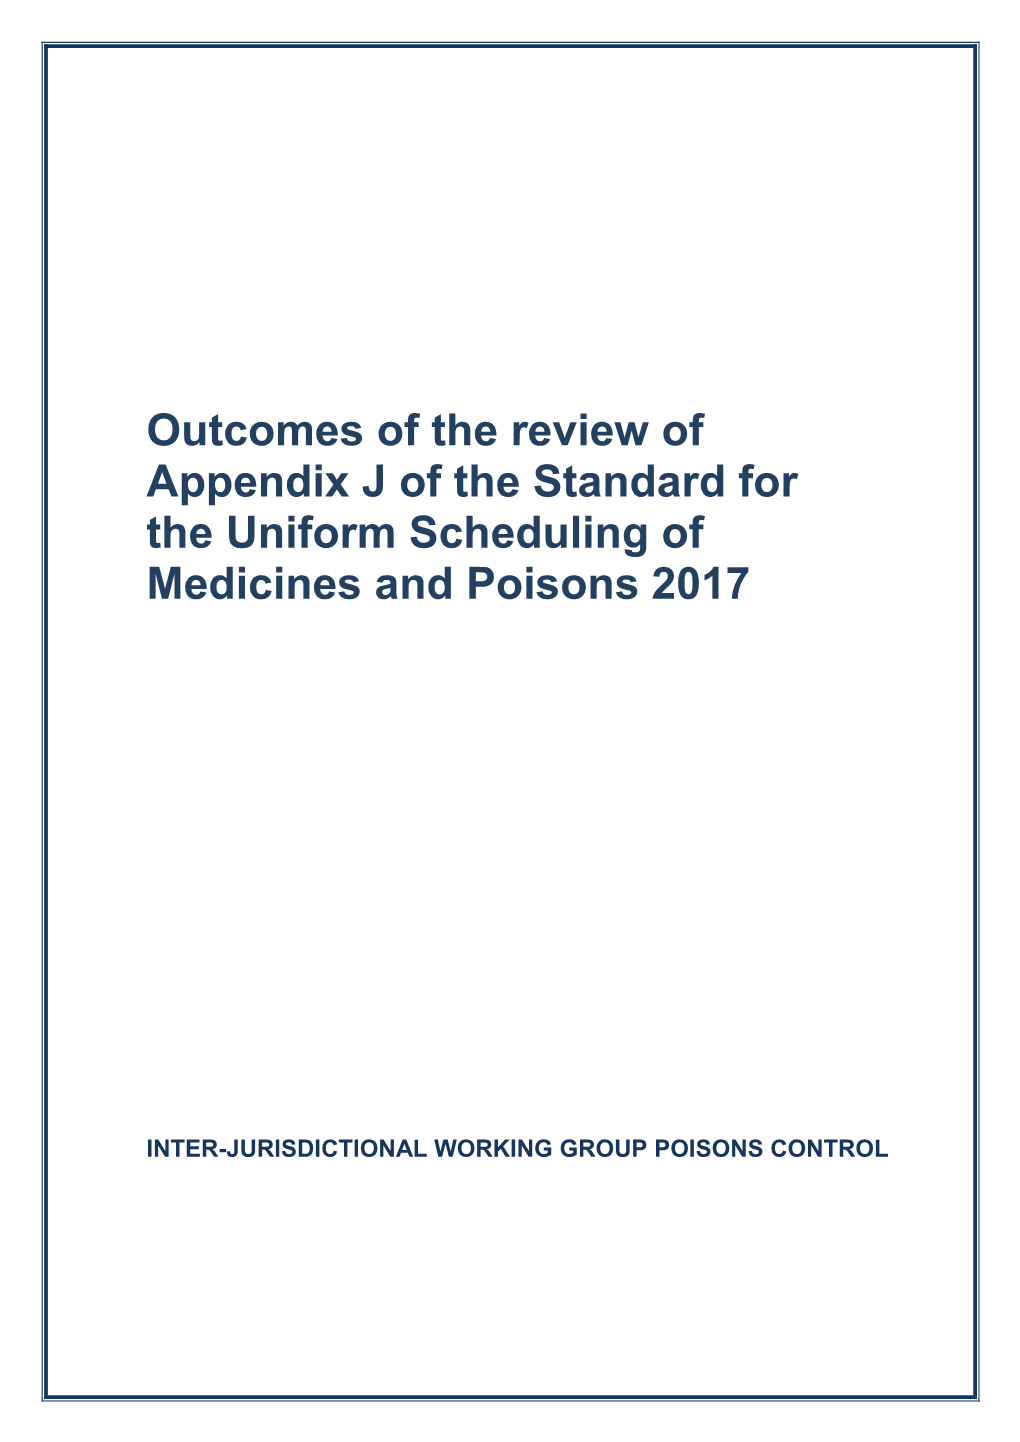 Outcomes of the Review of Appendix J of the Standard for the Uniform Scheduling of Medicines and Poisons 2017